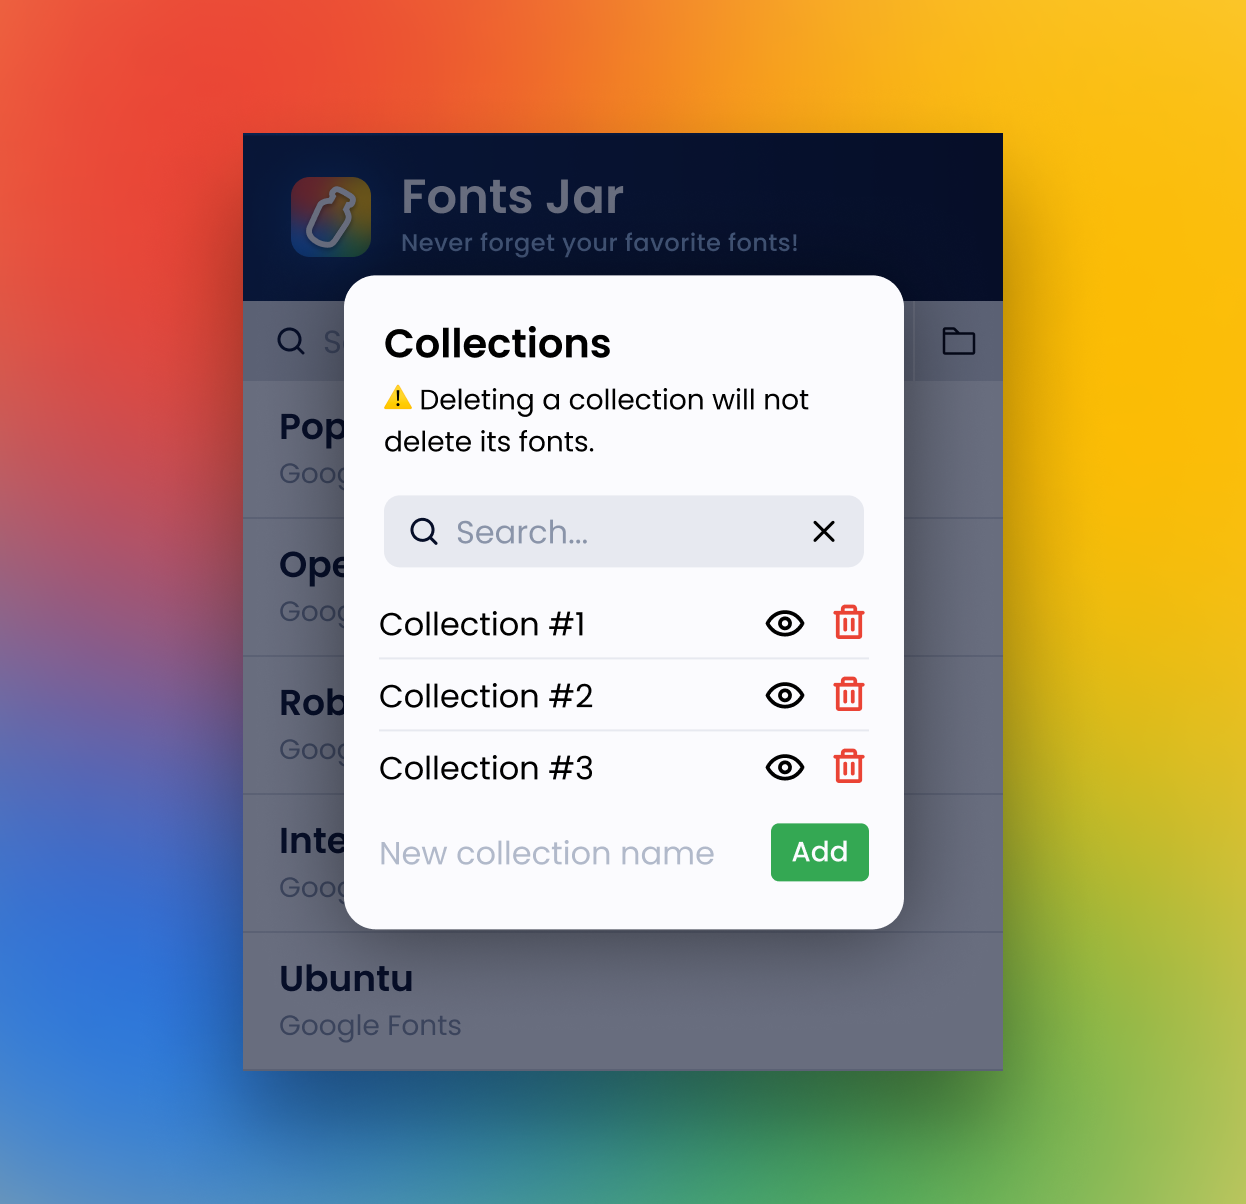 Fonts Jar's popup, with the collections modal open